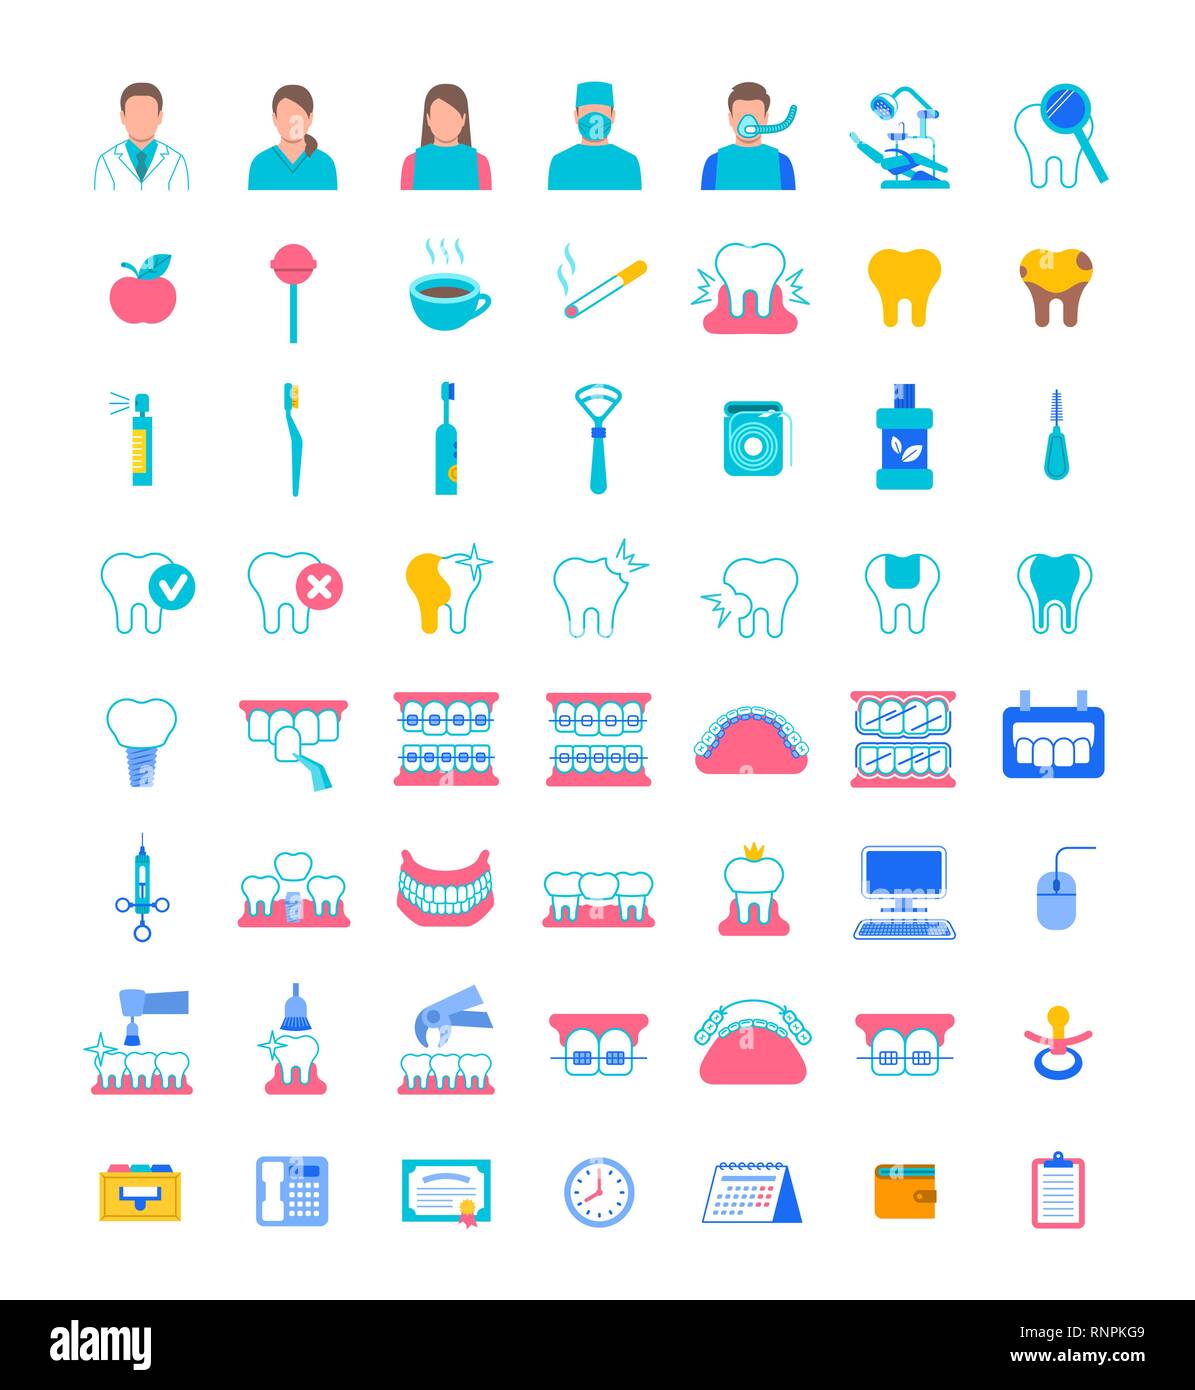 Dentistry icons. Flat color vector signs of dental clinic services. Oral health care concepts. Mouth hygiene, dental implants, surgery, orthodontic. D Stock Vector